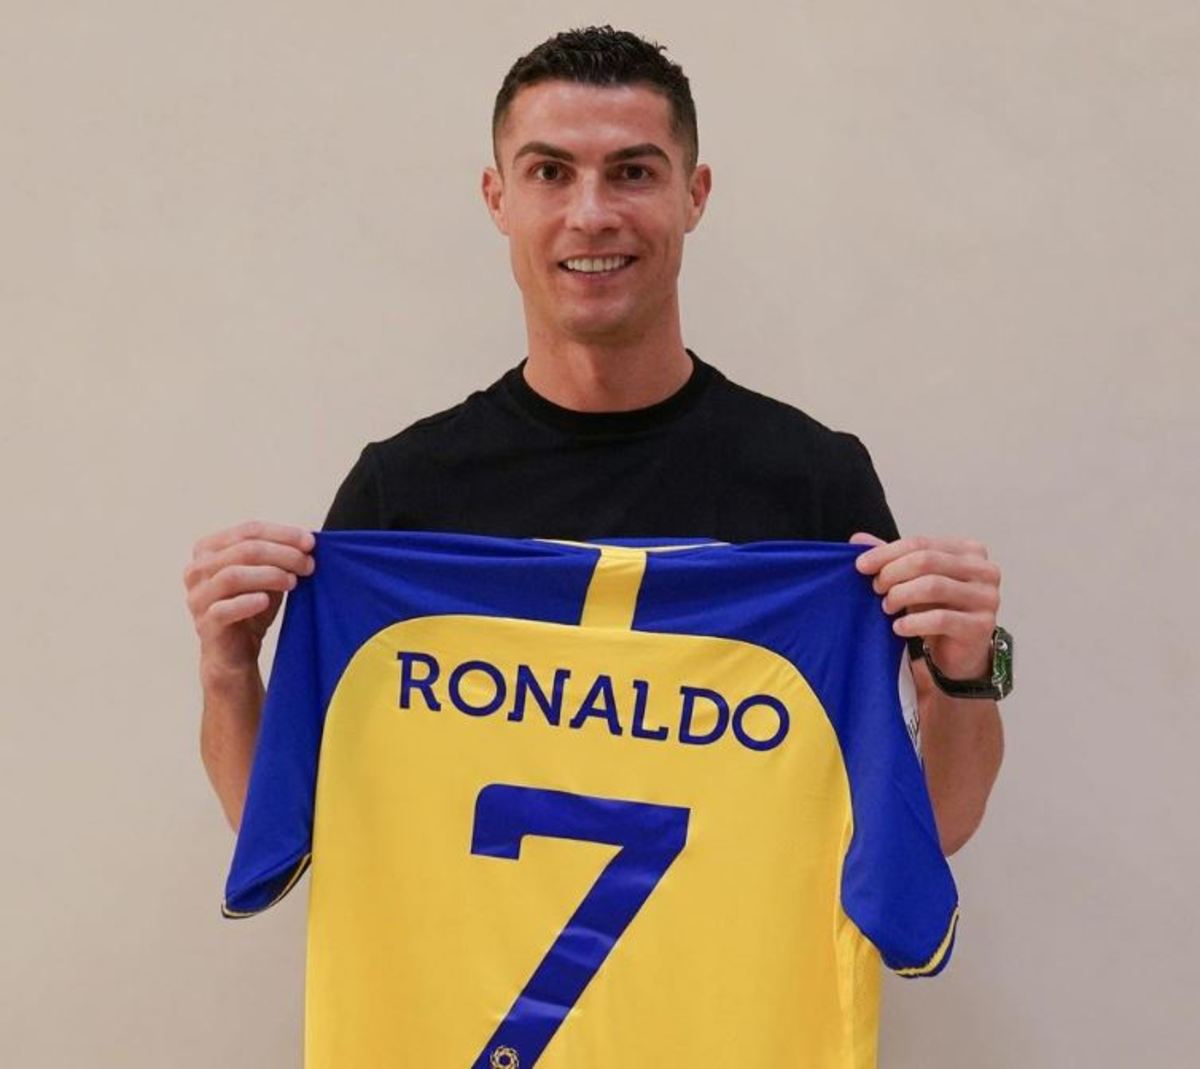 Cristiano Ronaldo: Why Is The No.7 Jersey So Important To Him?